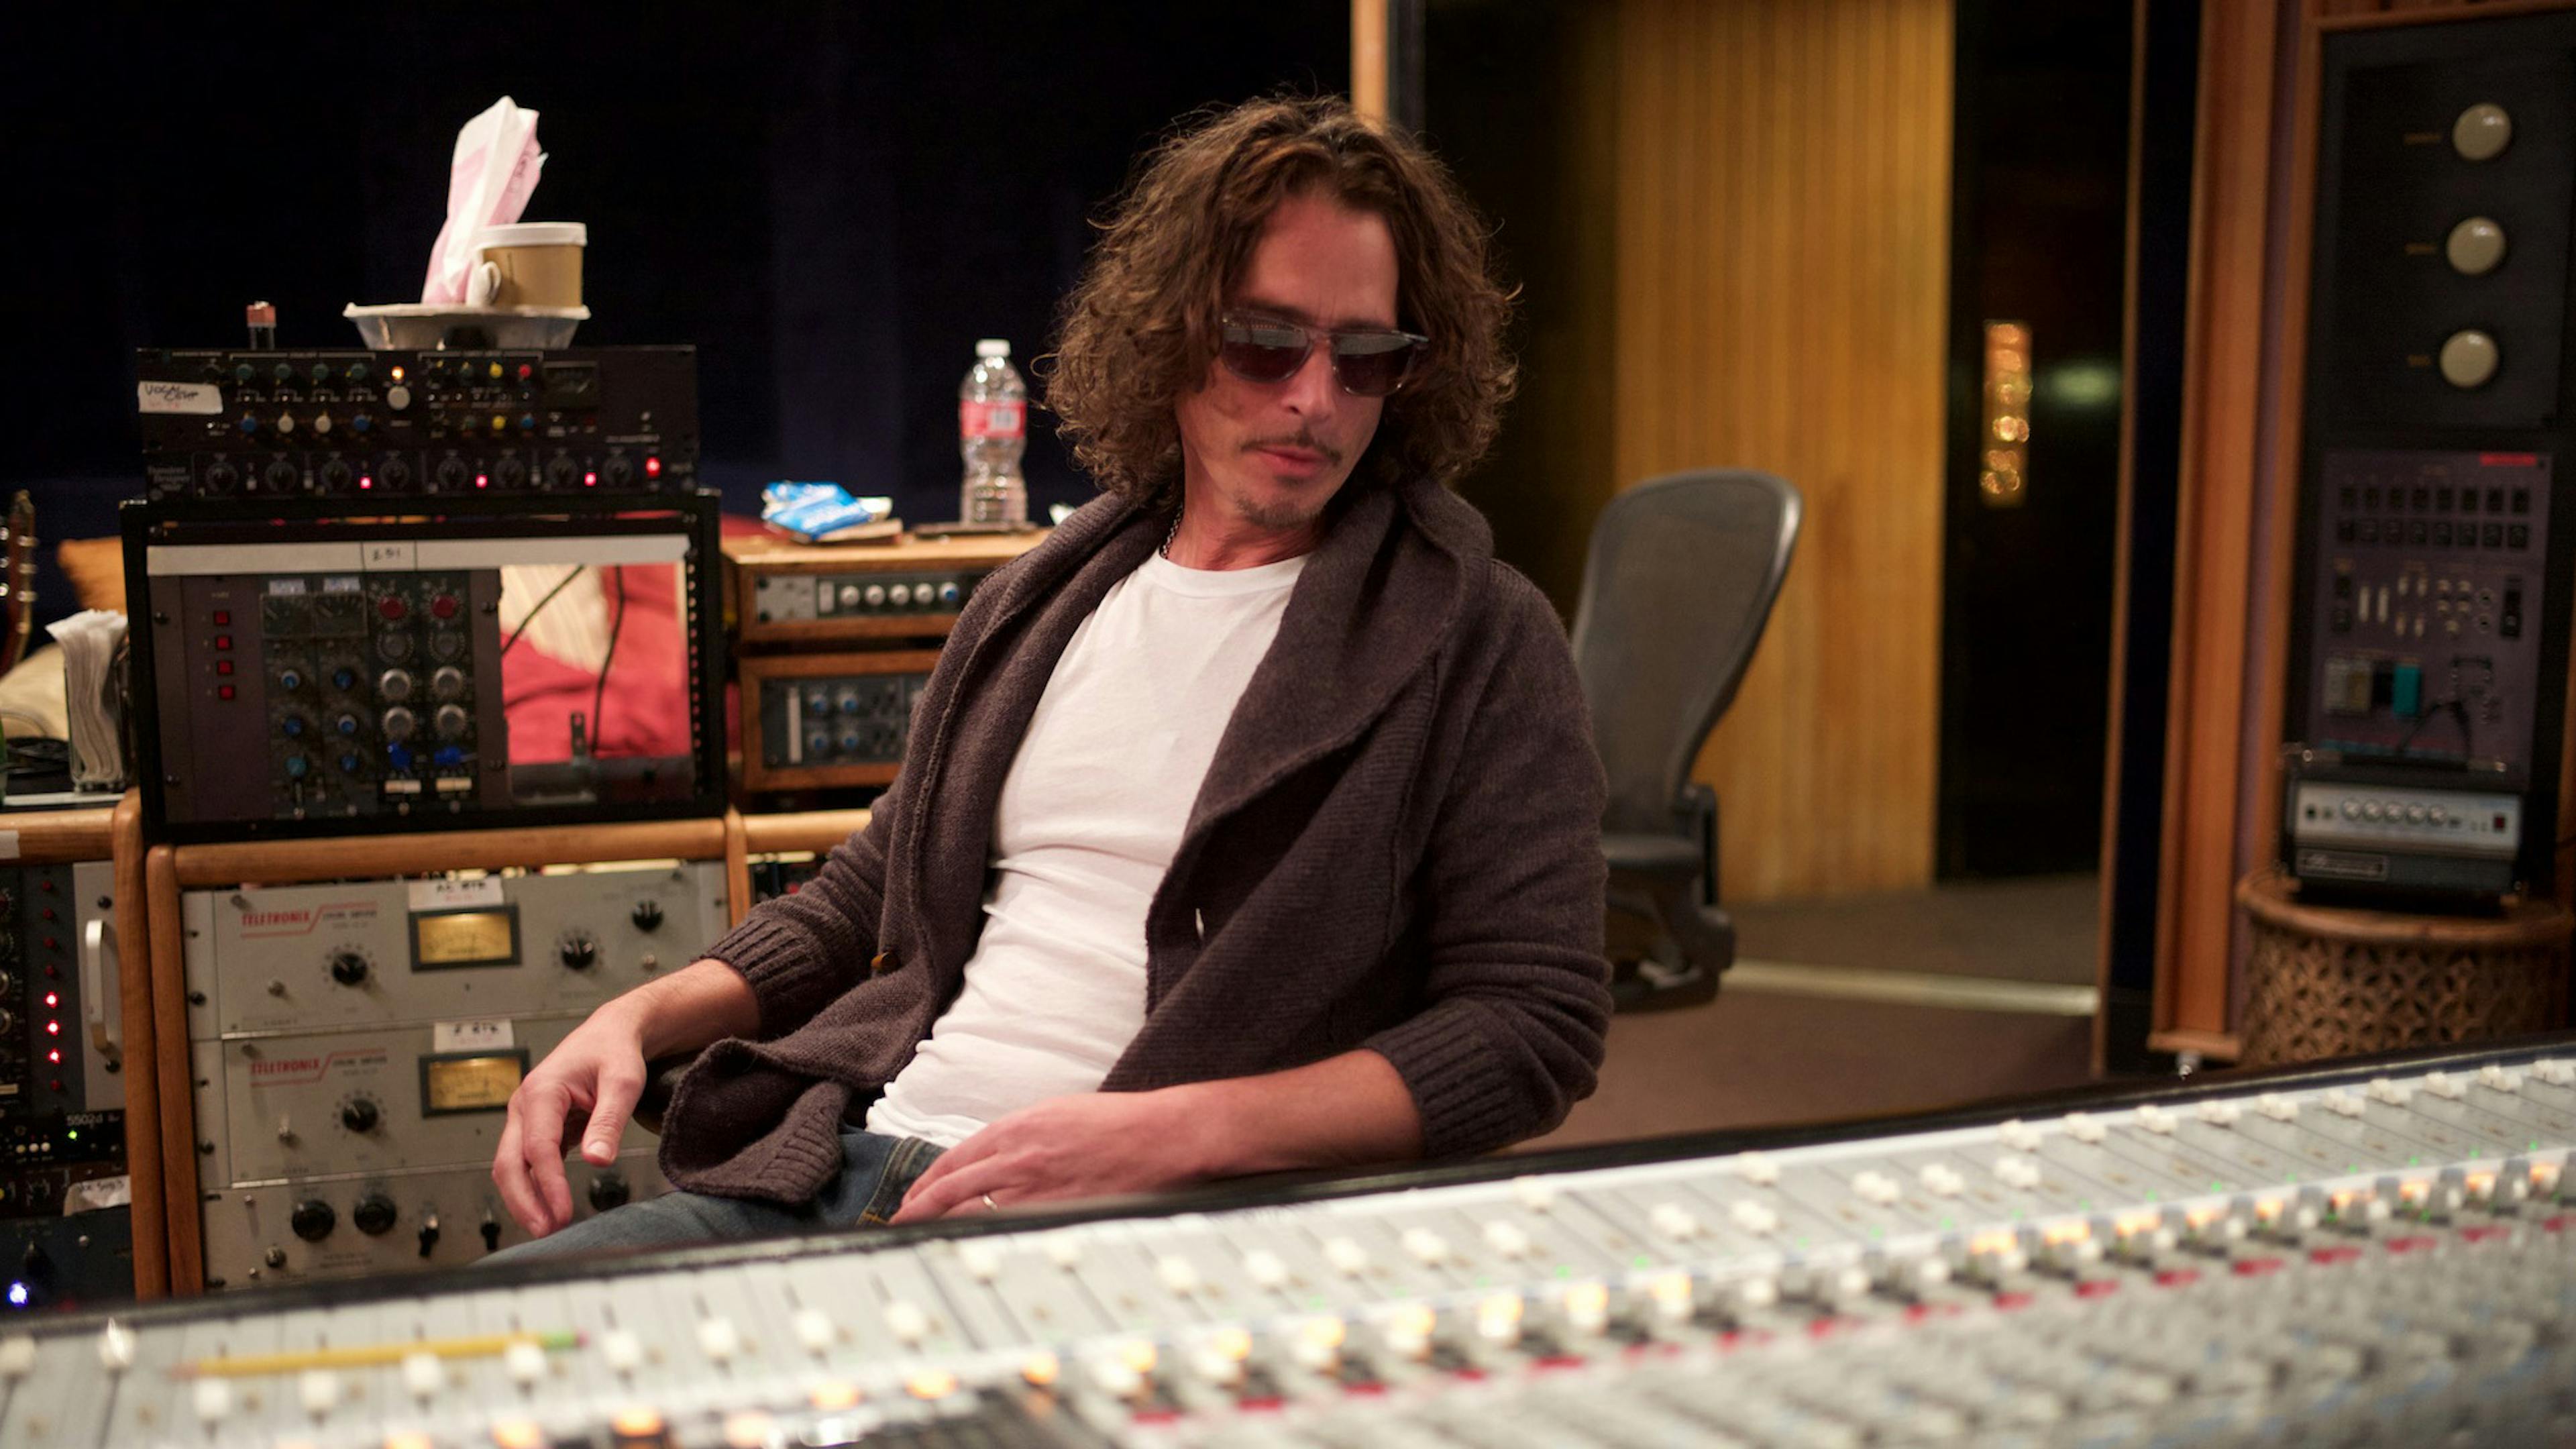 Vicky Cornell: "All of Chris' music, including Soundgarden, will see the light of day"